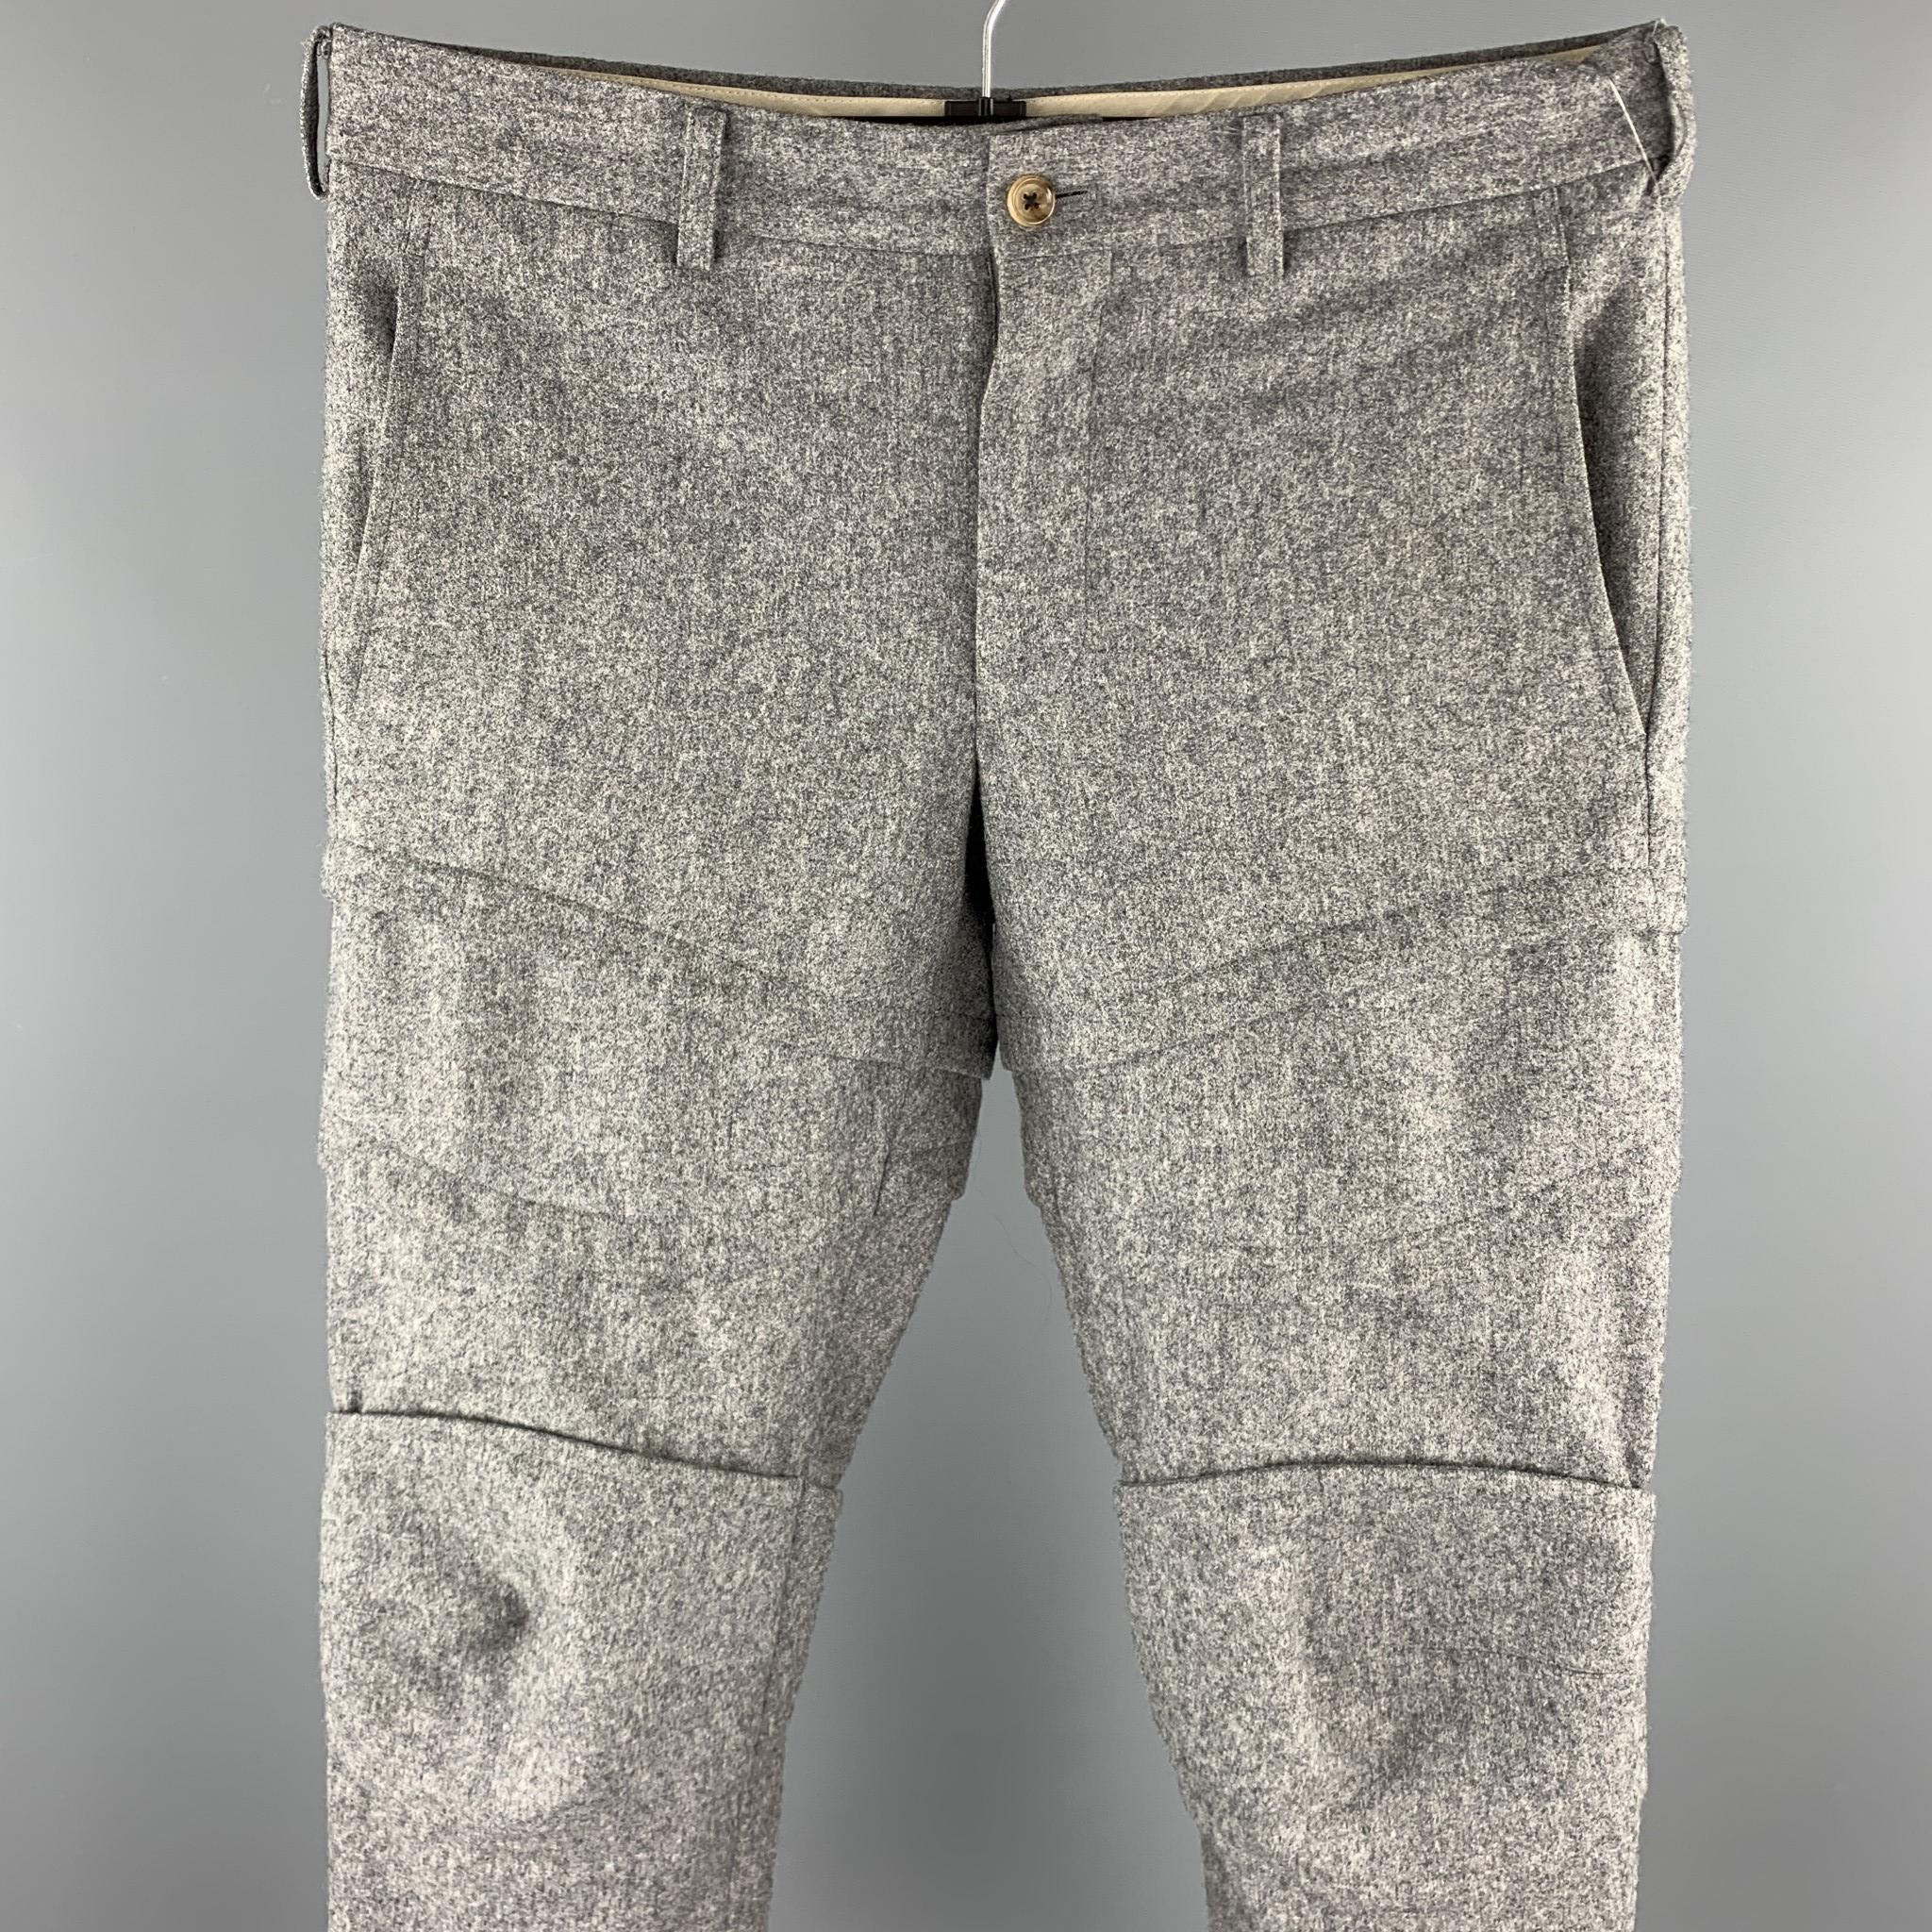 COMME des GARCONS HOMME PLUS dress pants comes in a grey wool featuring a cropped style, stitched details, and a zip fly closure. Made in Japan. 

Excellent Pre-Owned Condition.
Marked: JP S / AD2016

Measurements:

Waist: 32 in. 
Rise: 8 in.